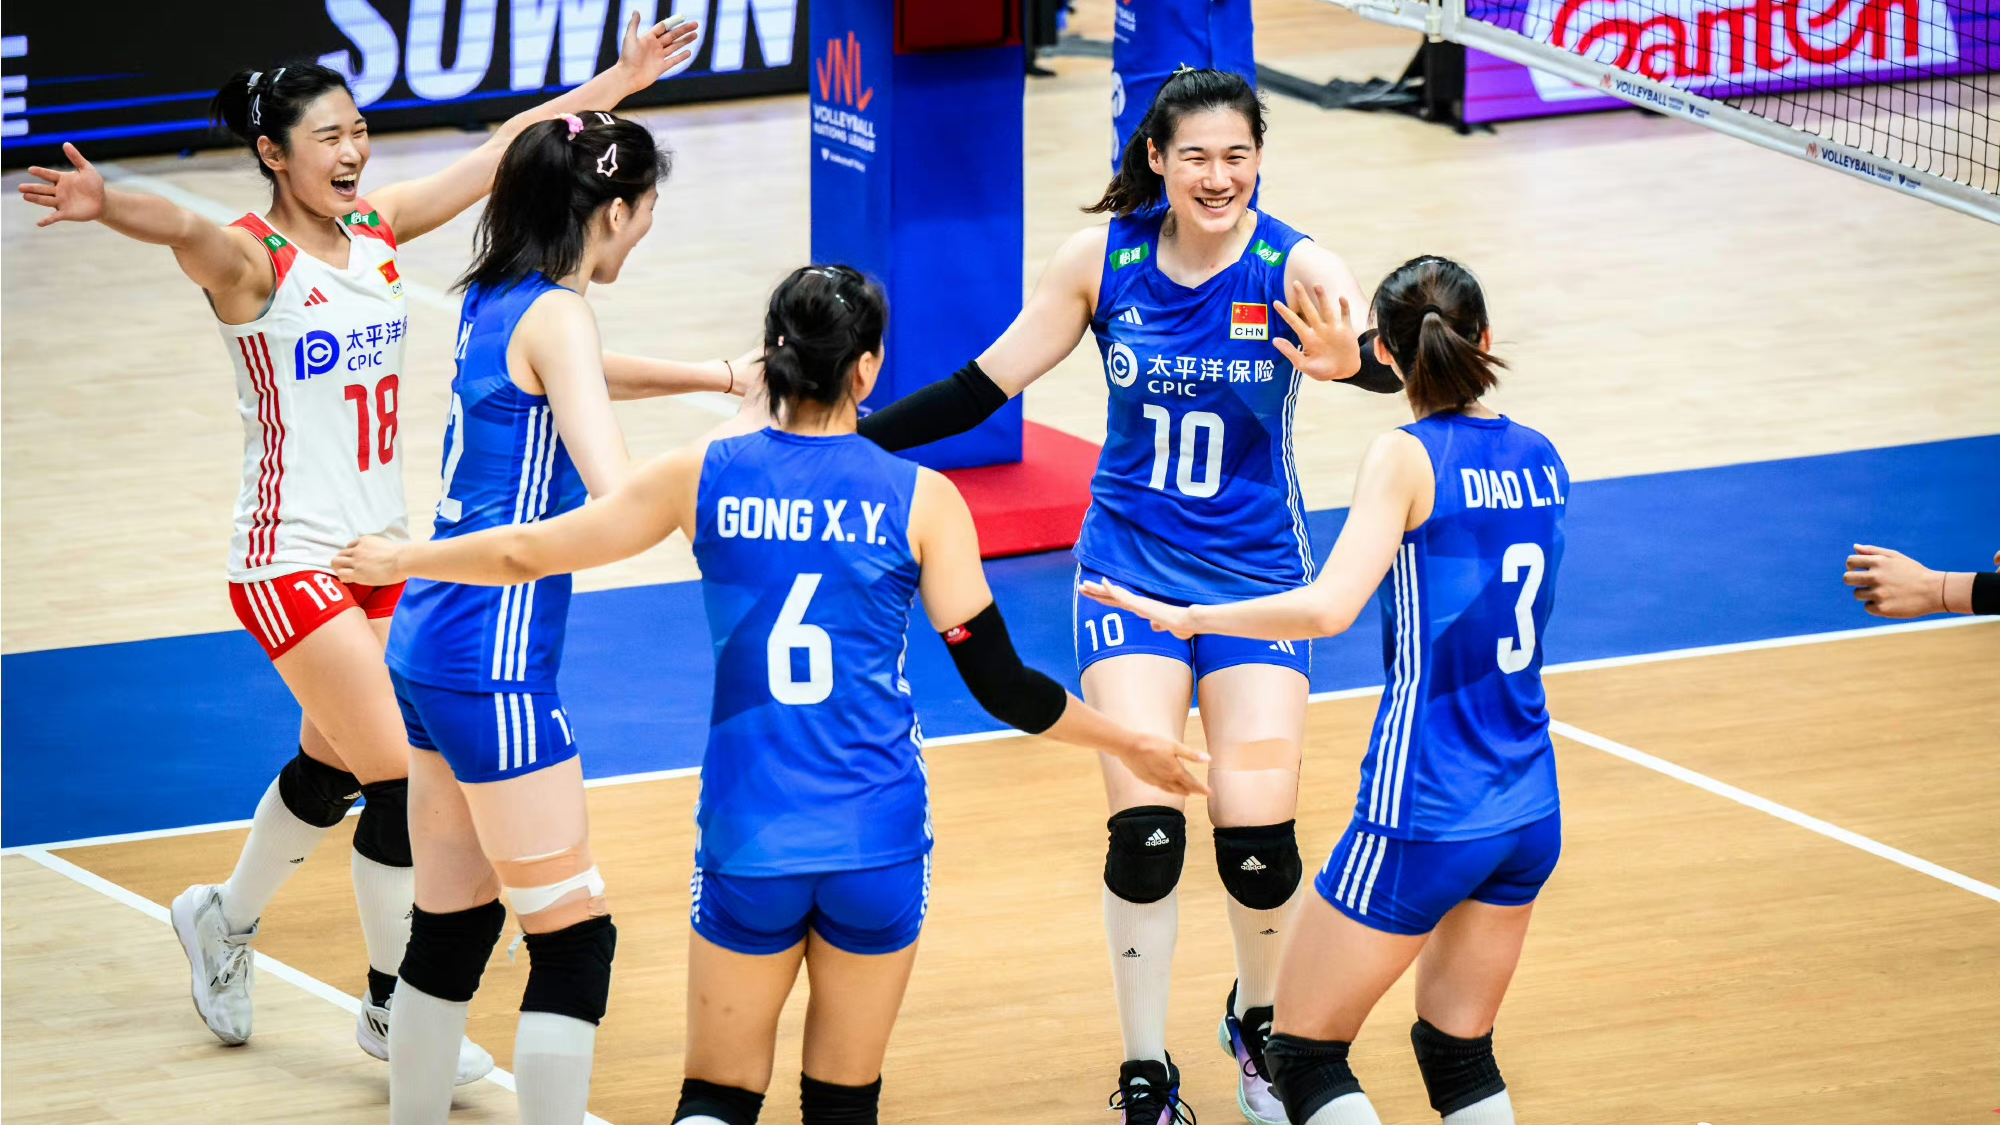 Chinese players celebrate a point during the game against Team USA at the FIVB Volleyball Women's Nations League in Suwon, South Korea, July 2, 2023. /FIVB